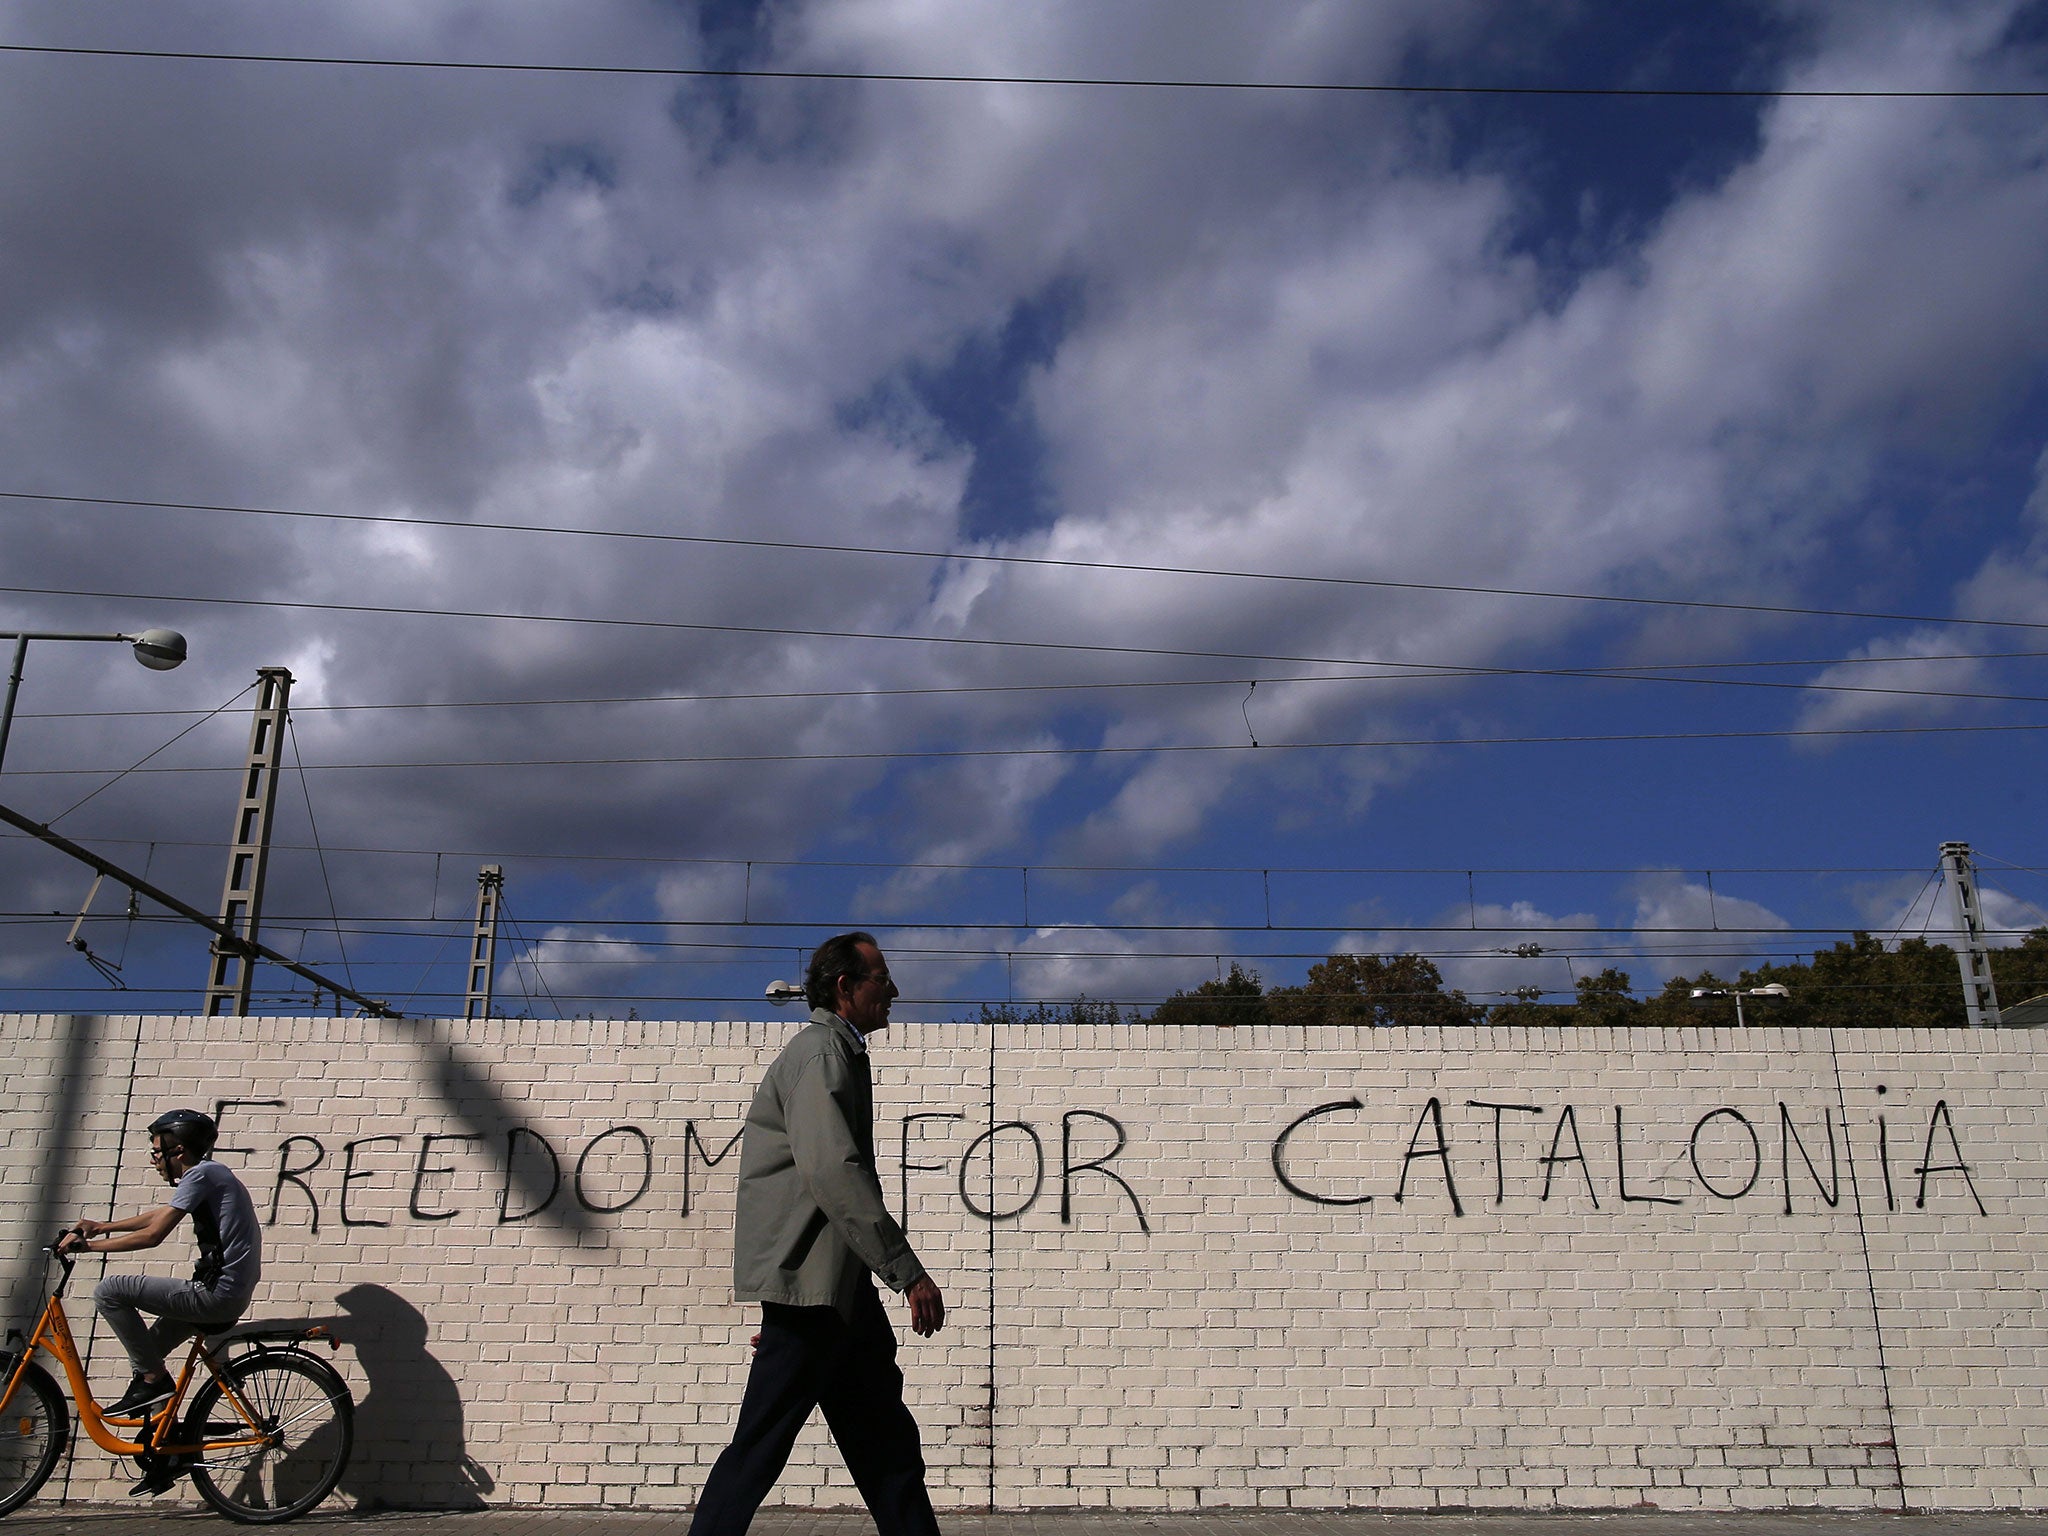 People pass in front of graffiti reading "Freedom for Catalonia" in Barcelona